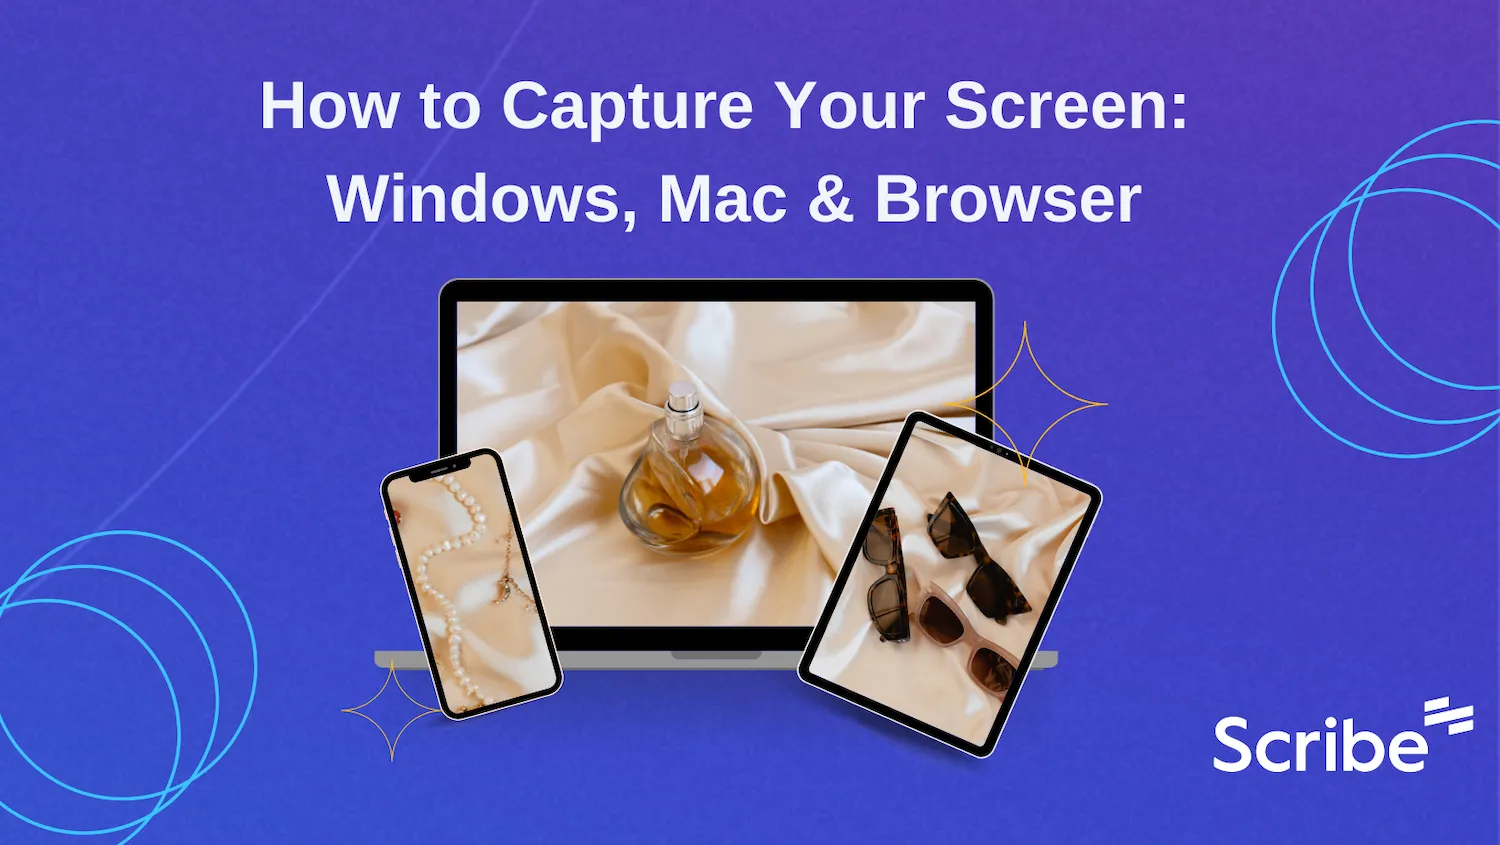 How to Capture Your Screen: Windows, Mac & Web Browsers